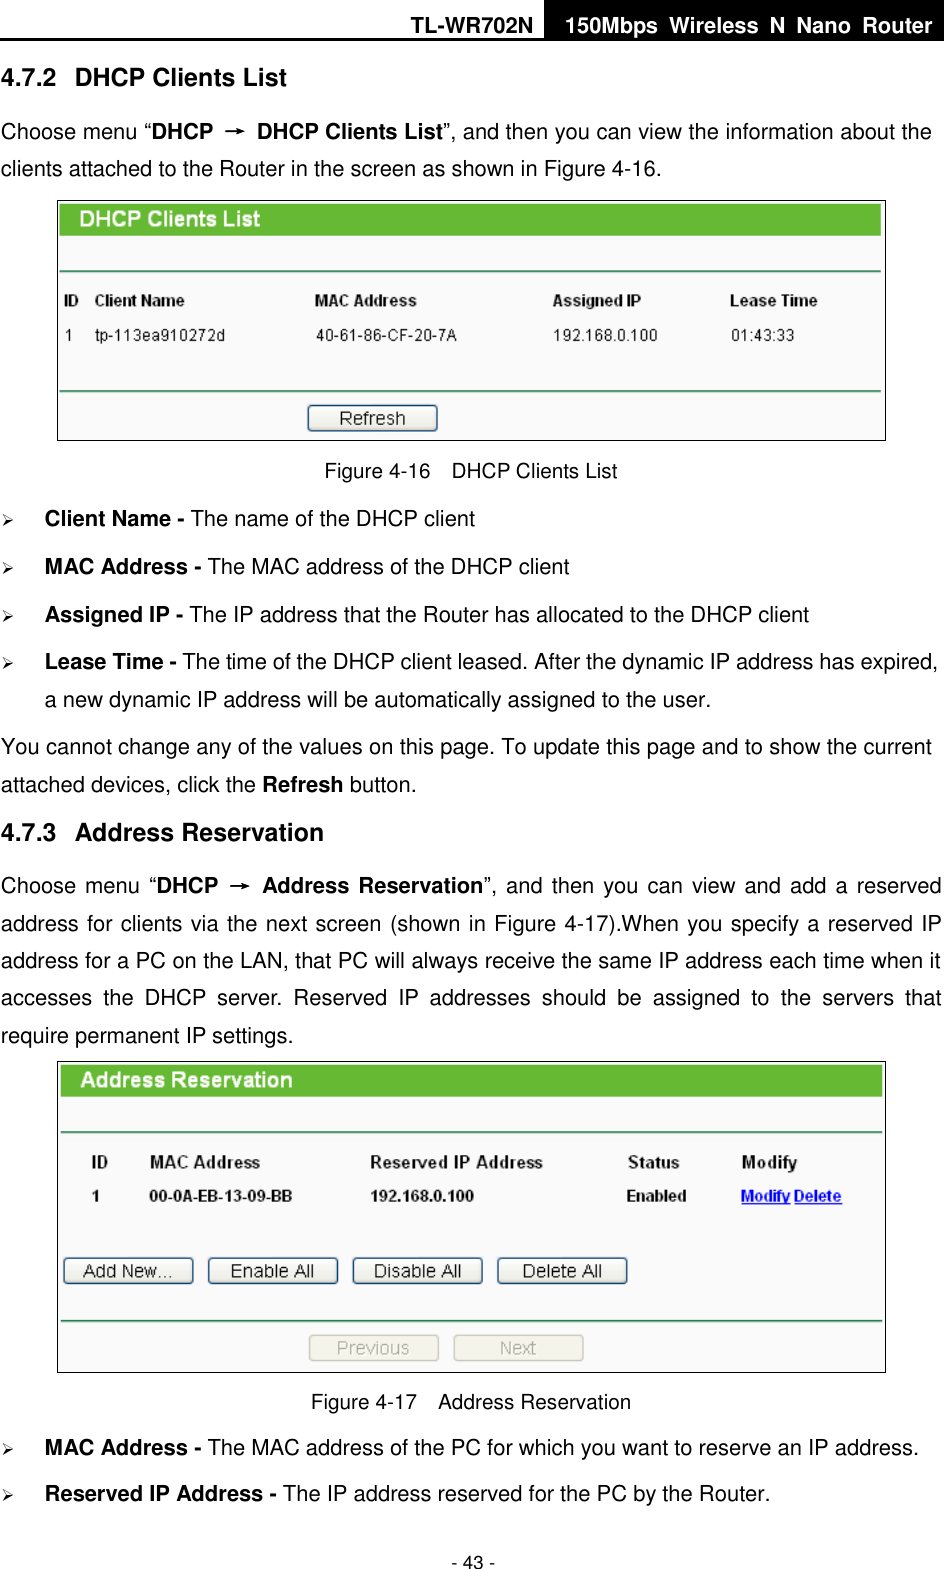 TL-WR702N 150Mbps  Wireless  N  Nano  Router  - 43 - 4.7.2  DHCP Clients List Choose menu “DHCP  →  DHCP Clients List”, and then you can view the information about the clients attached to the Router in the screen as shown in Figure 4-16.  Figure 4-16  DHCP Clients List  Client Name - The name of the DHCP client    MAC Address - The MAC address of the DHCP client    Assigned IP - The IP address that the Router has allocated to the DHCP client  Lease Time - The time of the DHCP client leased. After the dynamic IP address has expired, a new dynamic IP address will be automatically assigned to the user.     You cannot change any of the values on this page. To update this page and to show the current attached devices, click the Refresh button. 4.7.3  Address Reservation Choose menu “DHCP  →  Address Reservation”, and then you can view and add a reserved address for clients via the next screen (shown in Figure 4-17).When you specify a reserved IP address for a PC on the LAN, that PC will always receive the same IP address each time when it accesses  the  DHCP  server.  Reserved  IP  addresses  should  be  assigned  to  the  servers  that require permanent IP settings.    Figure 4-17  Address Reservation  MAC Address - The MAC address of the PC for which you want to reserve an IP address.  Reserved IP Address - The IP address reserved for the PC by the Router. 